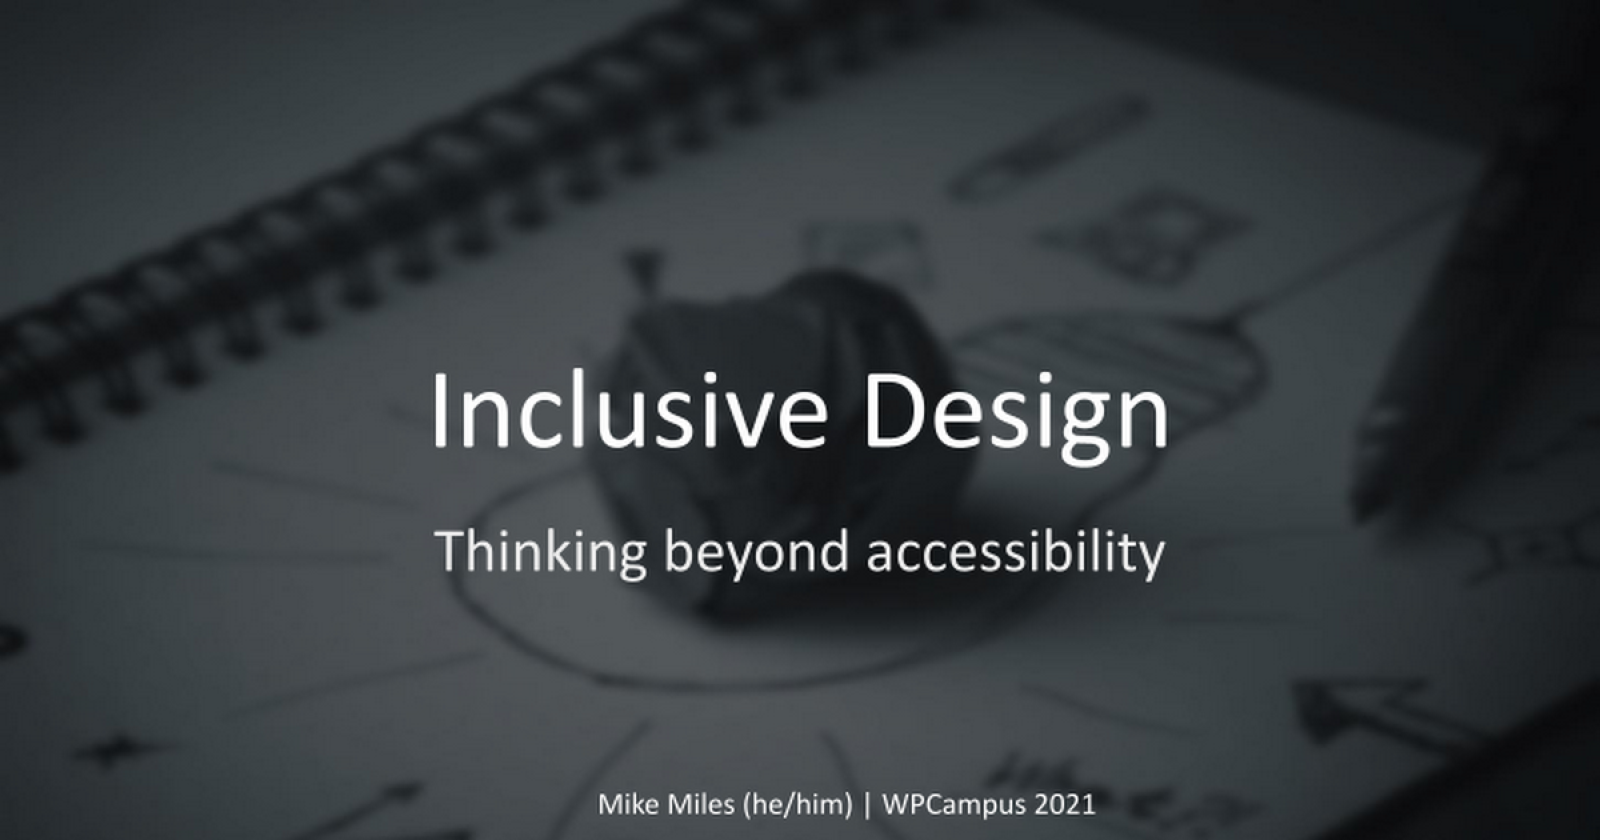 Inclusive Design: Thinking beyond accessibility